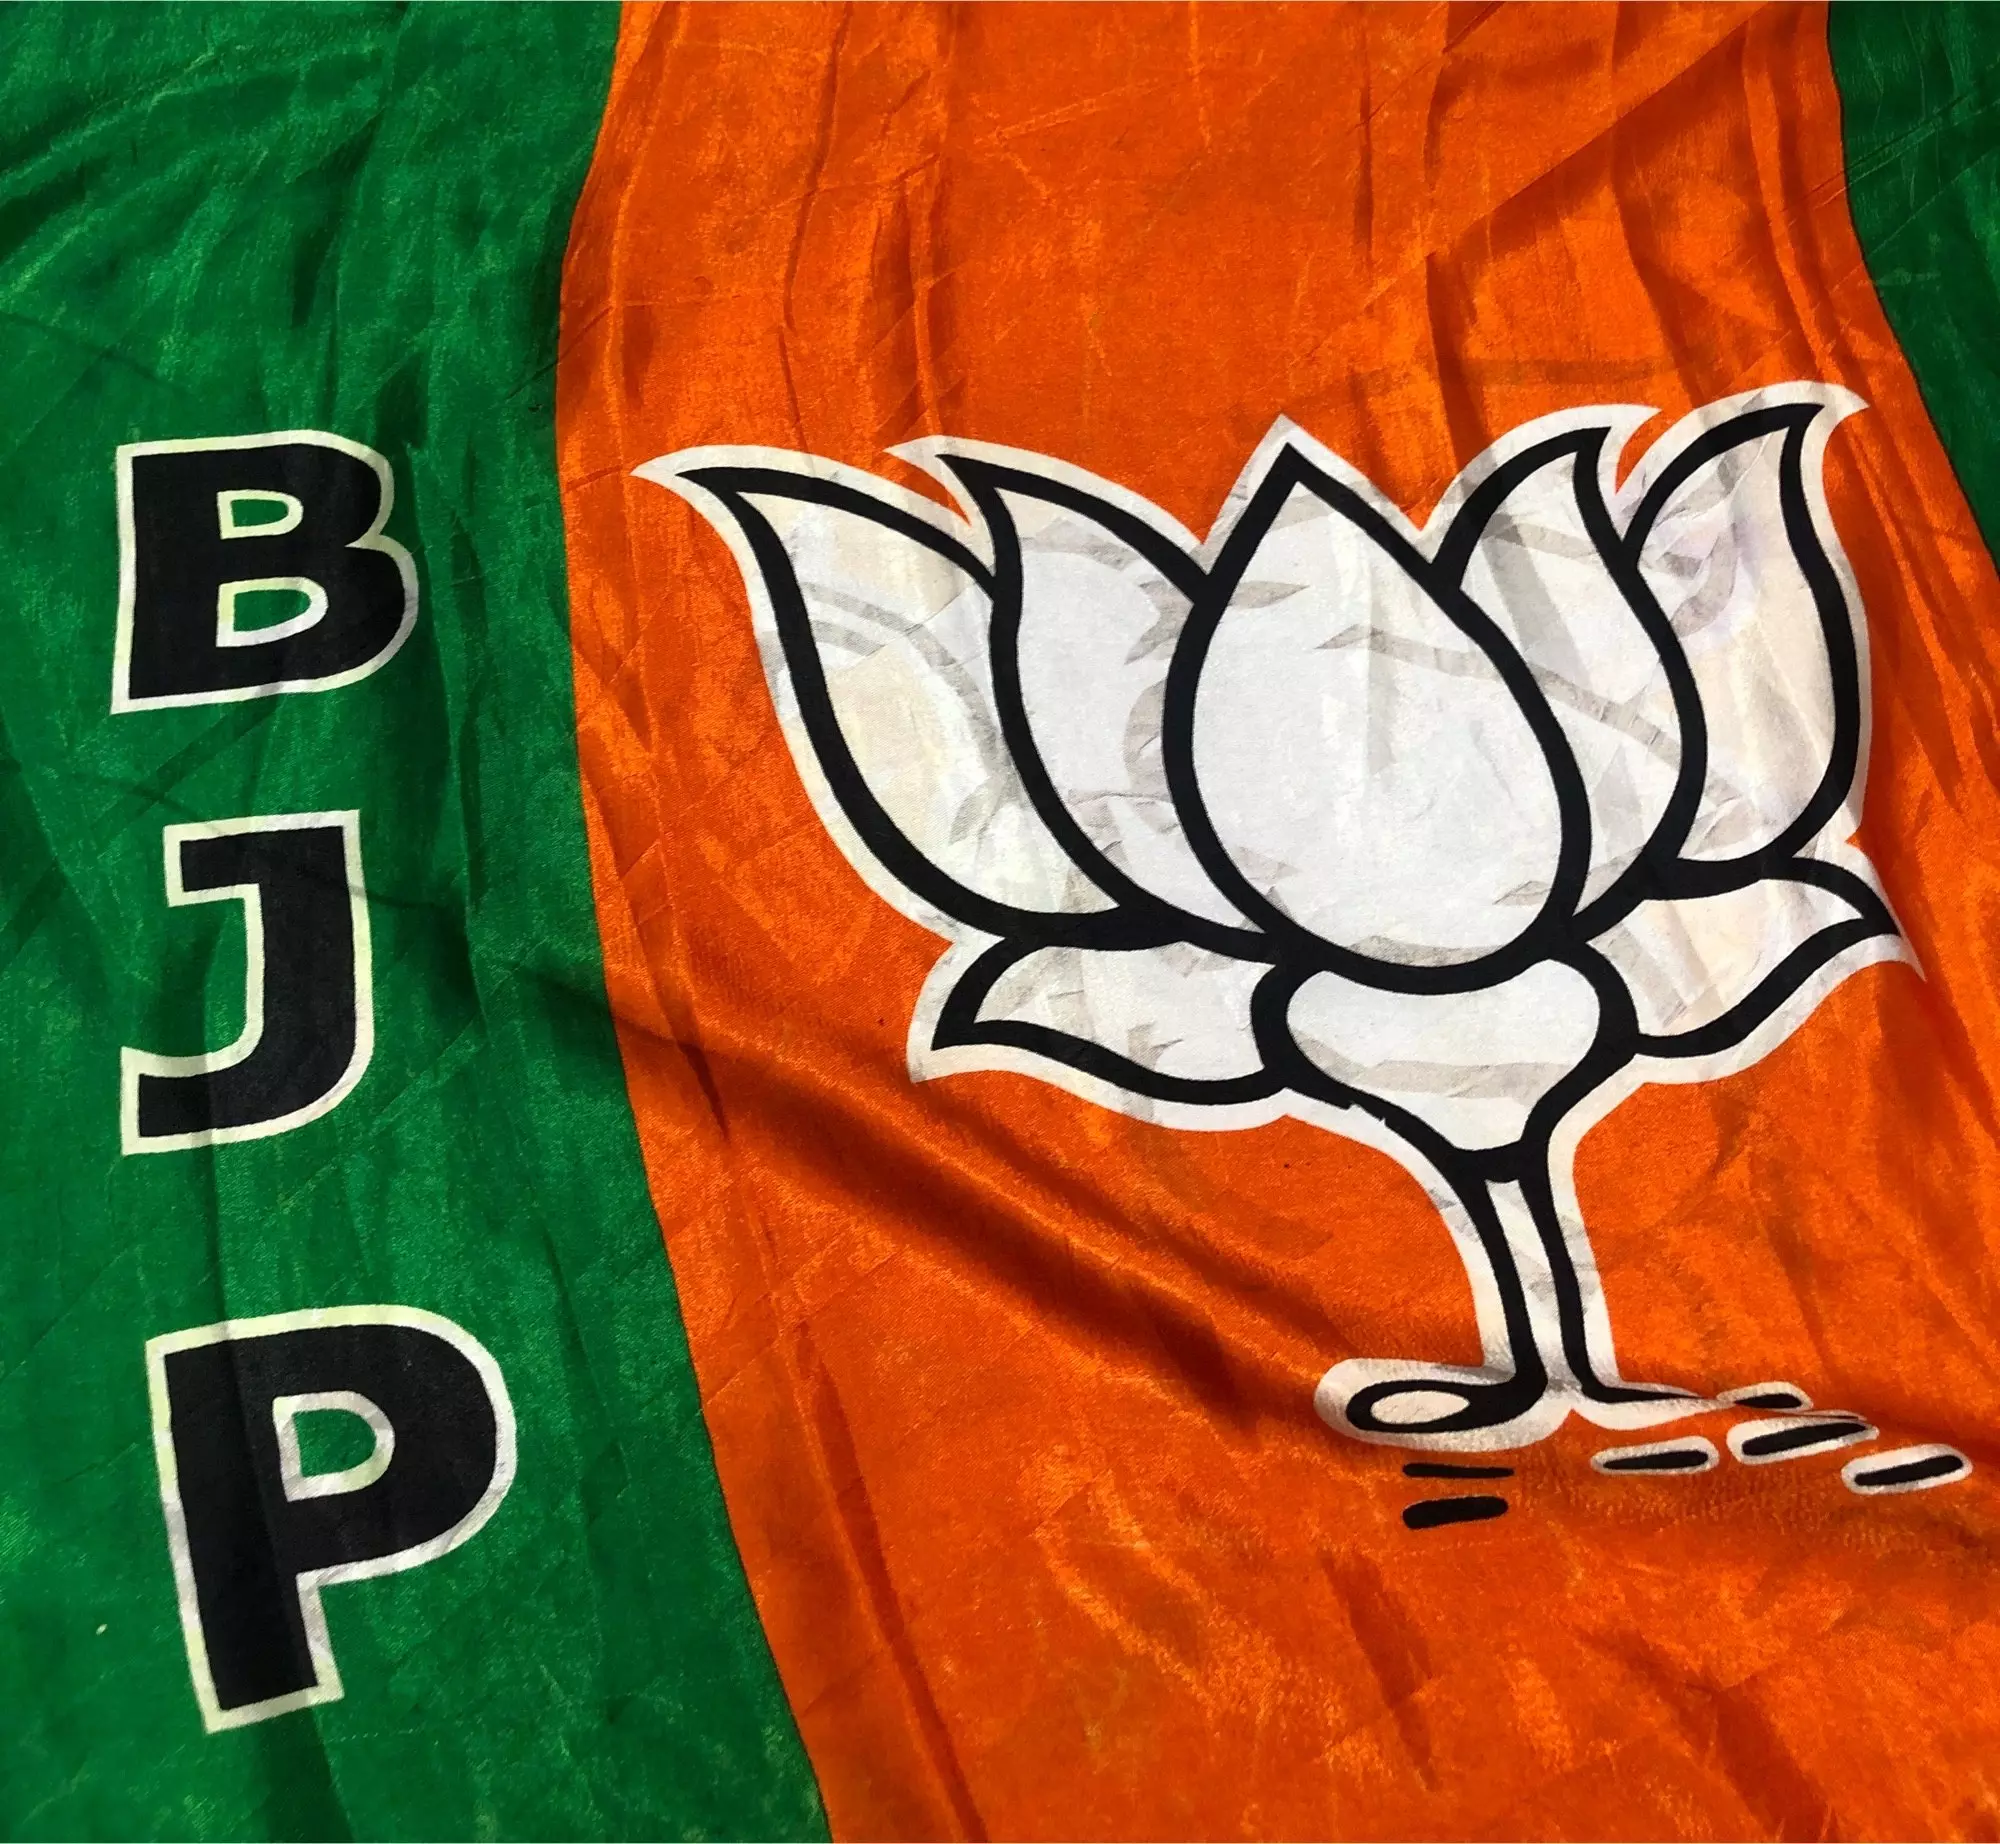 Differences Crop Up Among BJP MLAs Over Selection of Legislature Party Leader